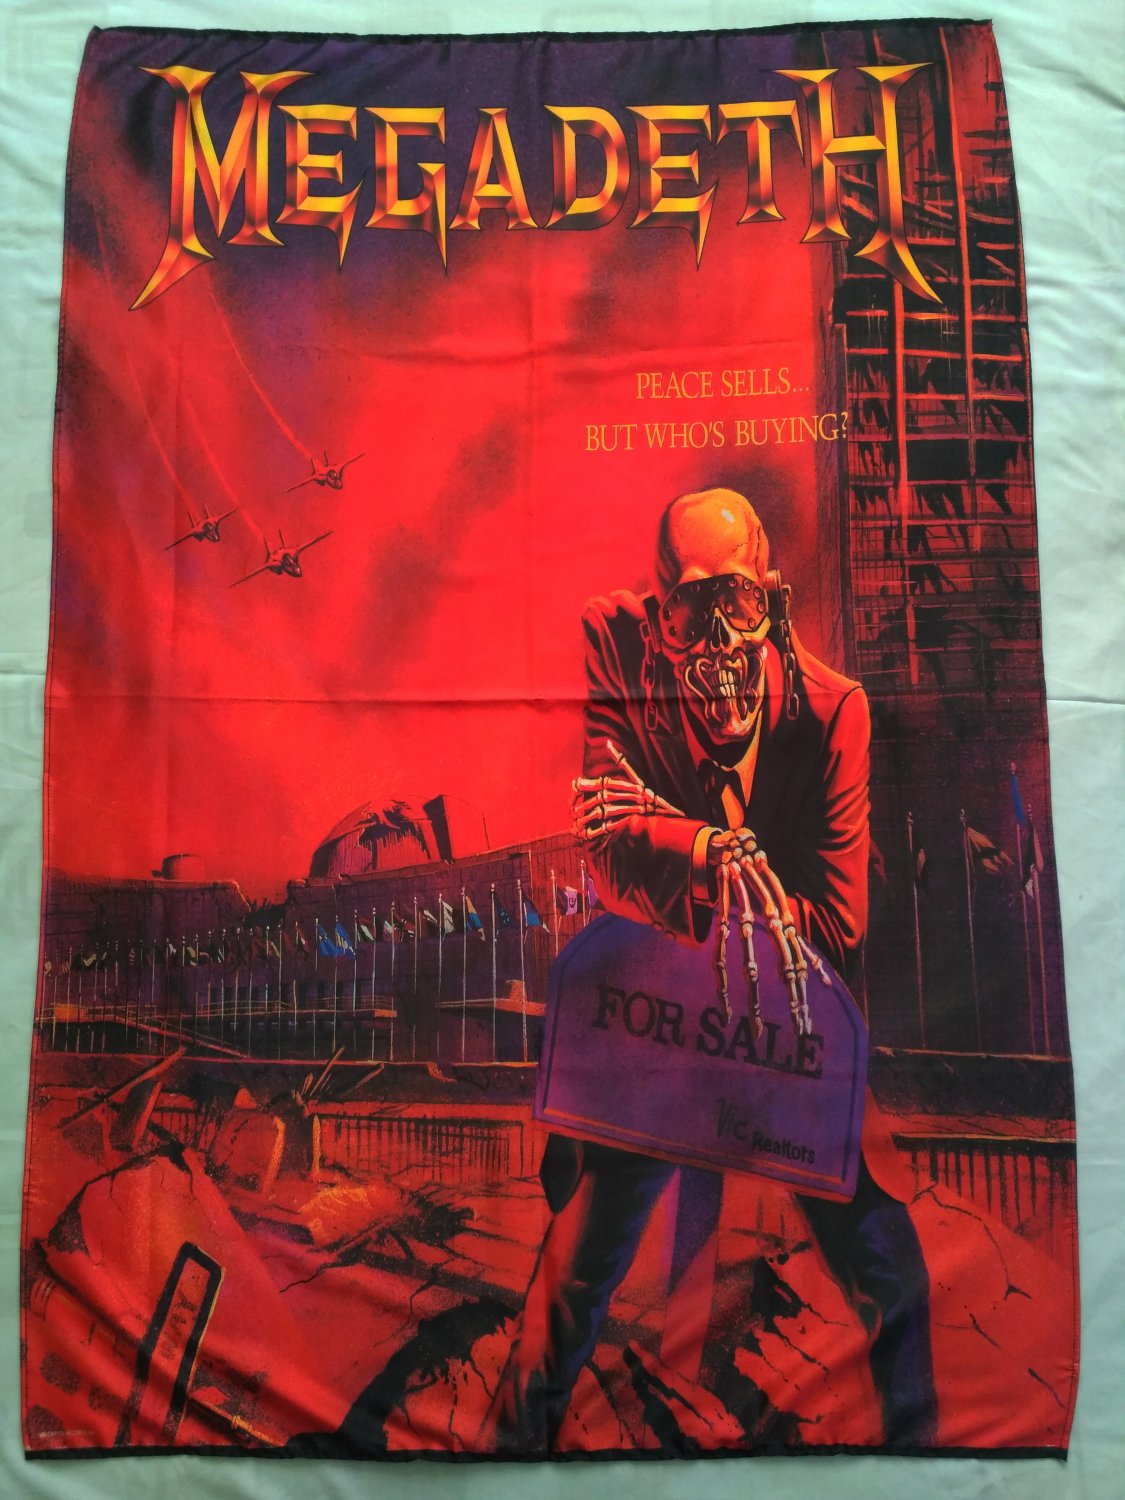 MEGADETH - Peace sells FLAG Thrash Metal cloth poster Dave Mustaine Speed metal